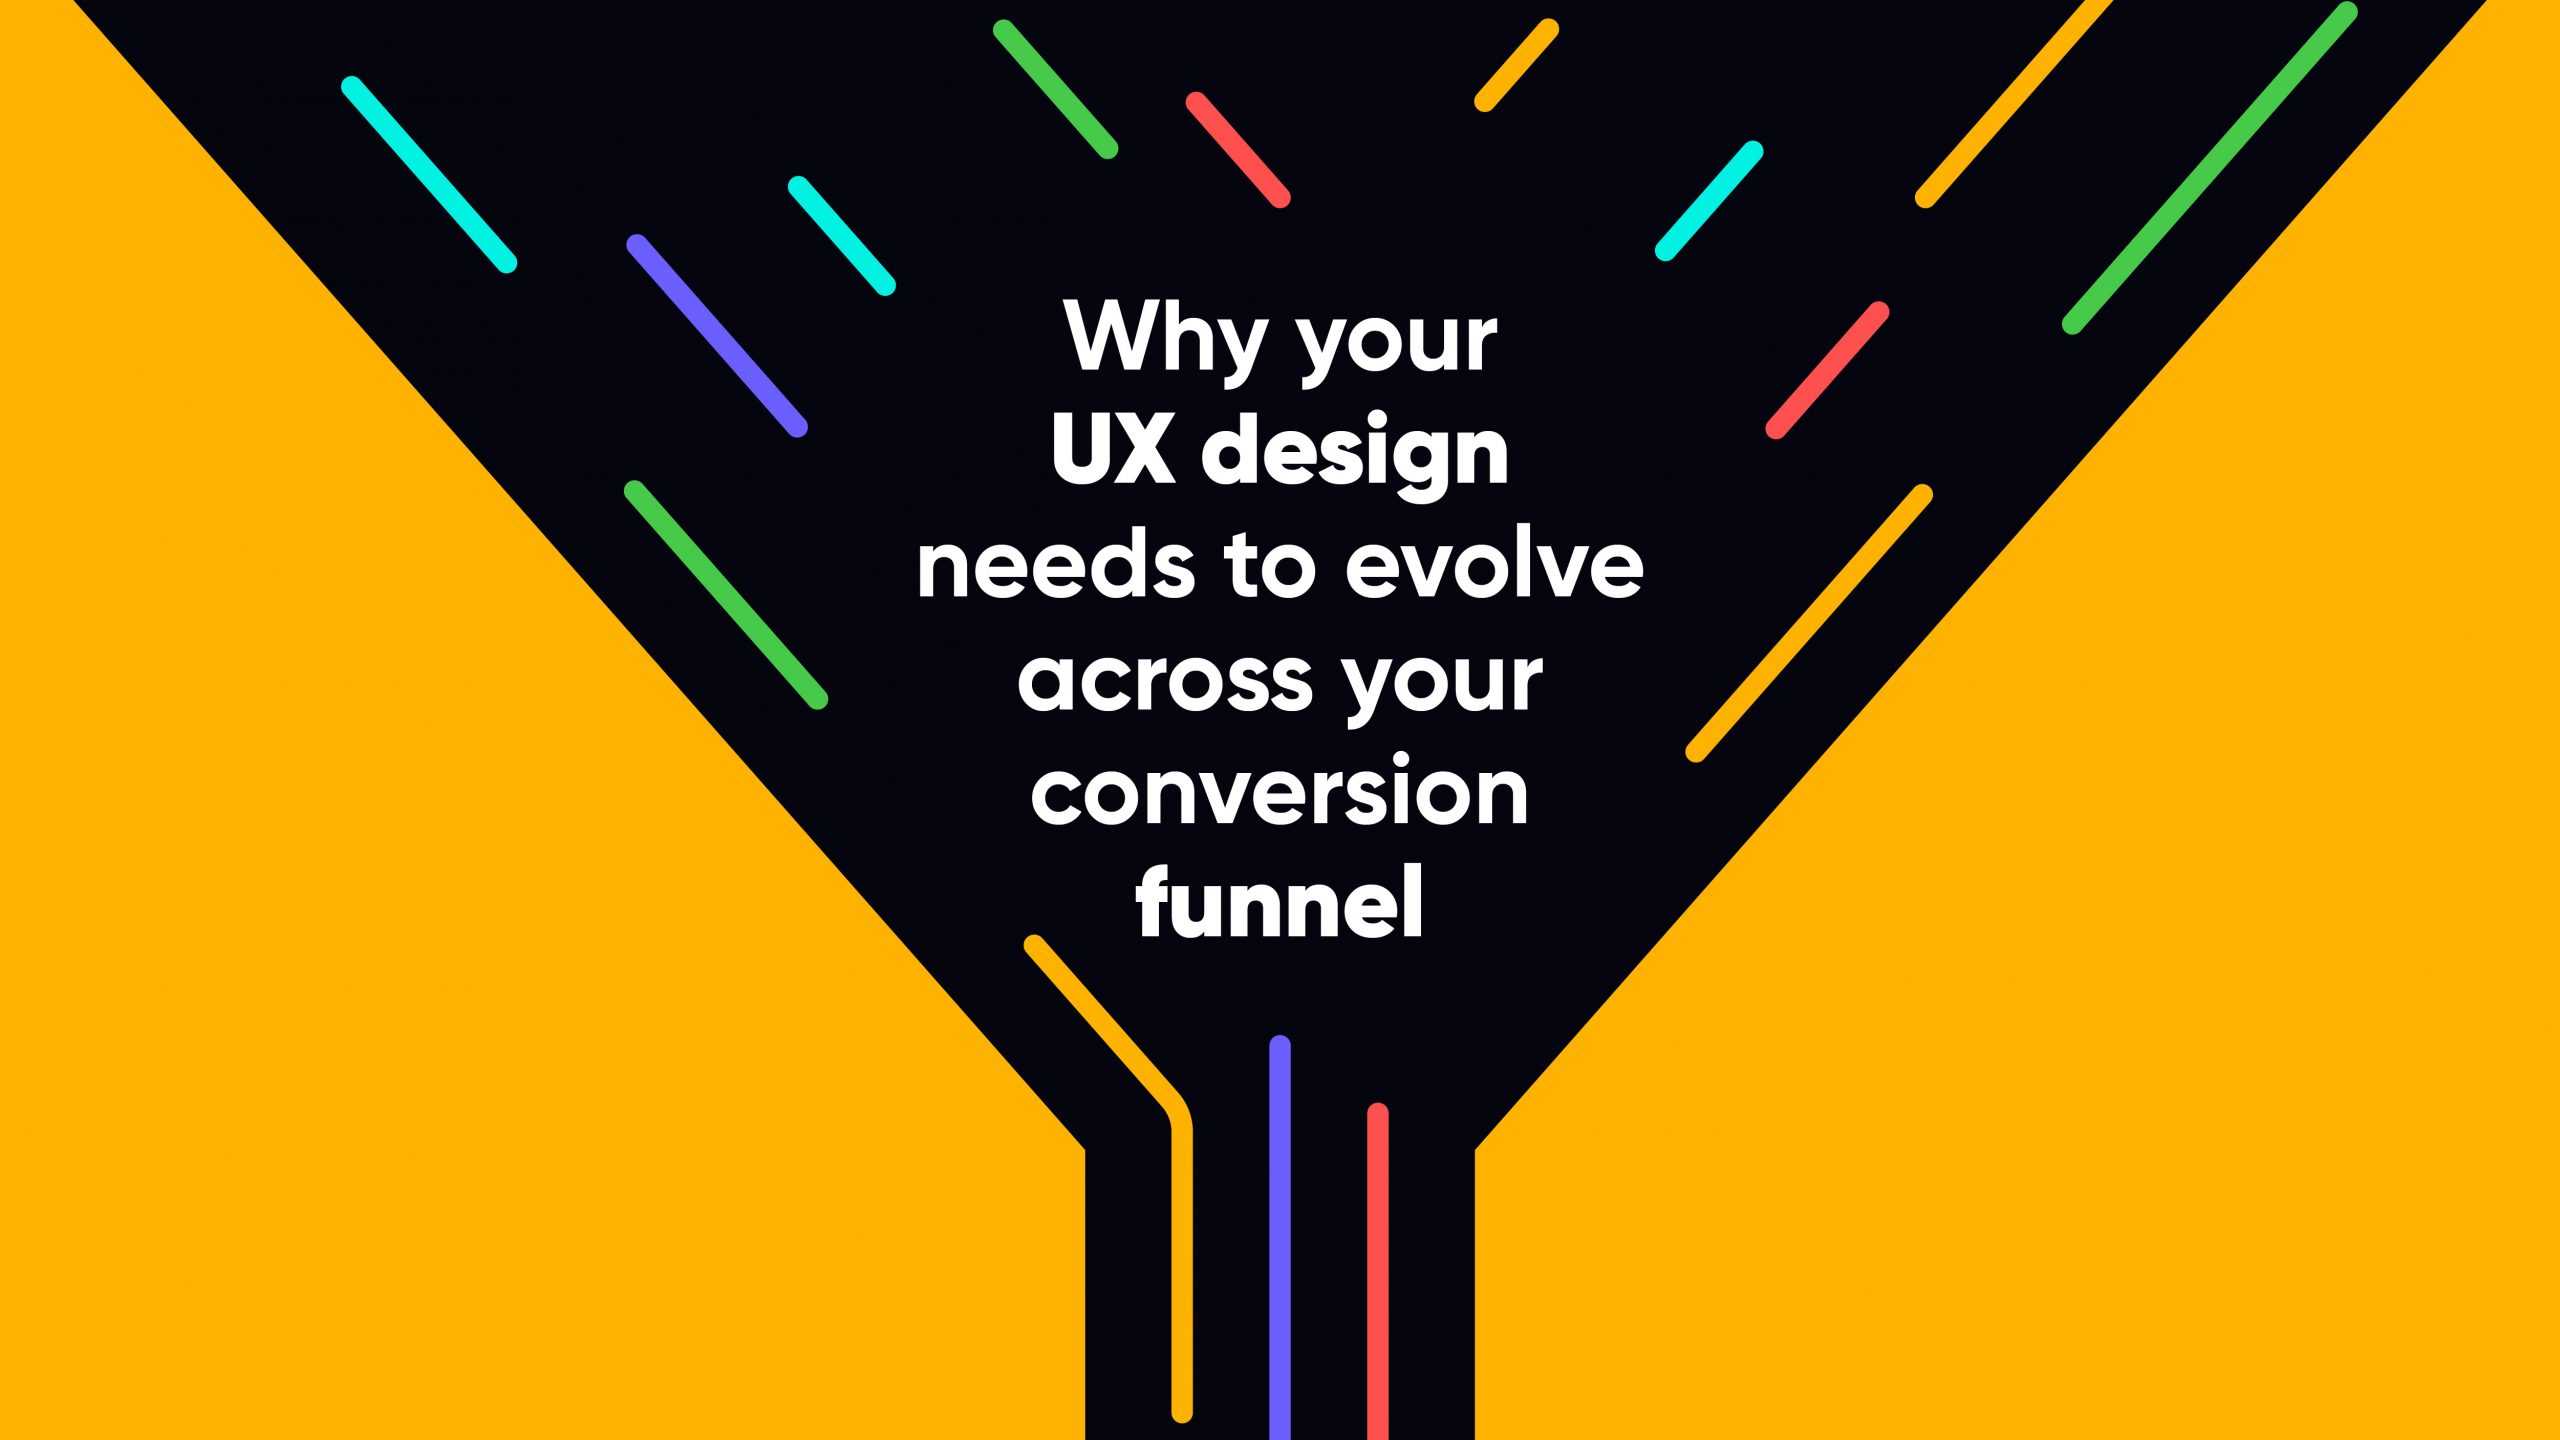 Relation between UX design and conversion funnels